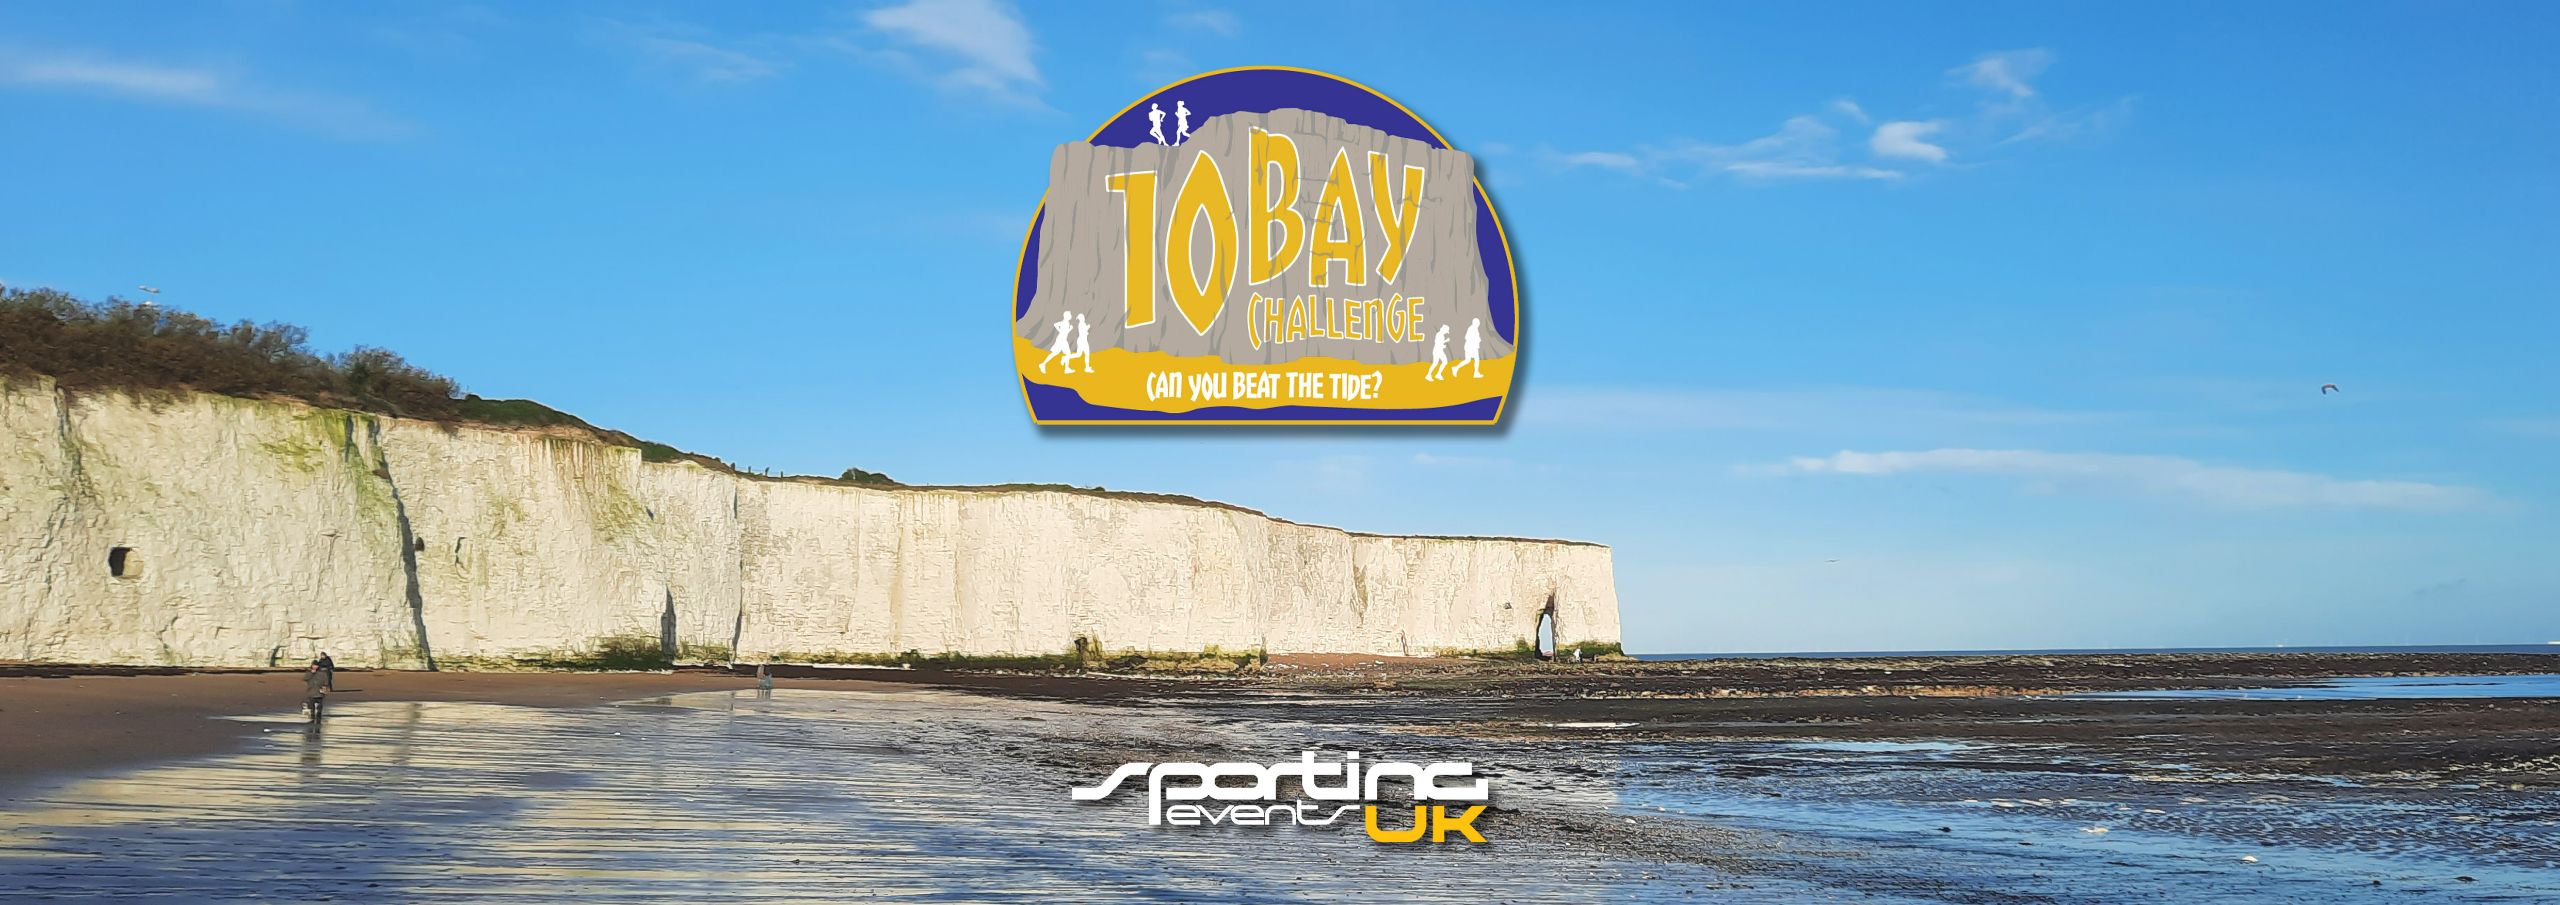 Image for 10Bay Challenge - 15 Miles